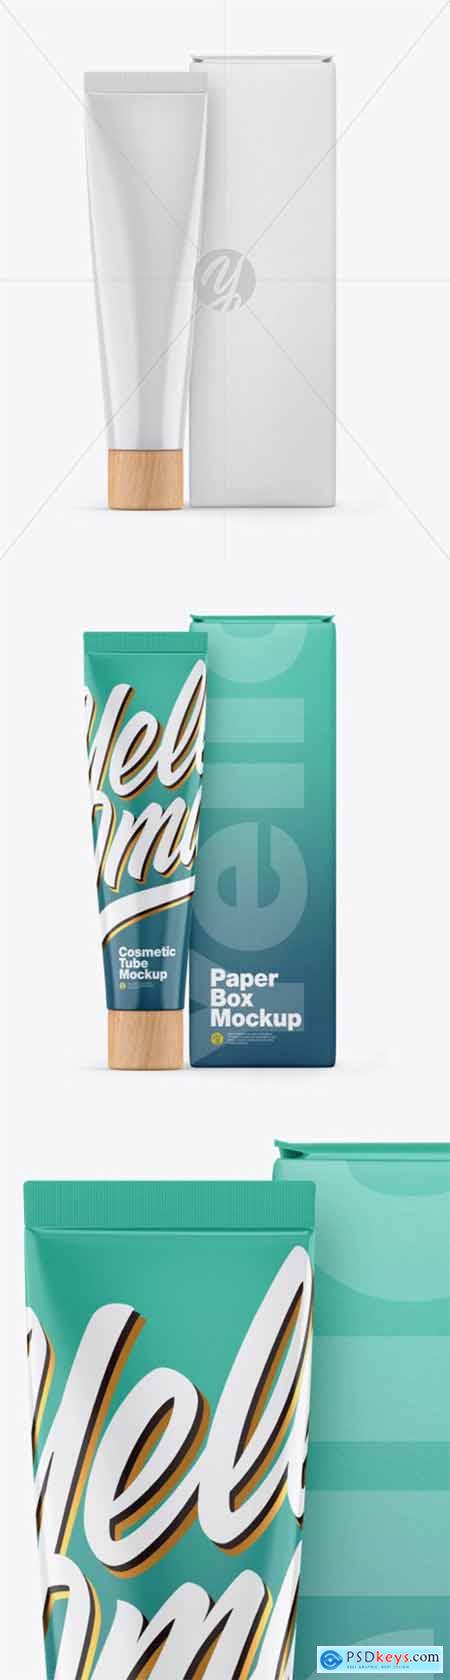 Download Glossy Cosmetic Tube W Box Mockup 56077 Free Download Photoshop Vector Stock Image Via Torrent Zippyshare From Psdkeys Com